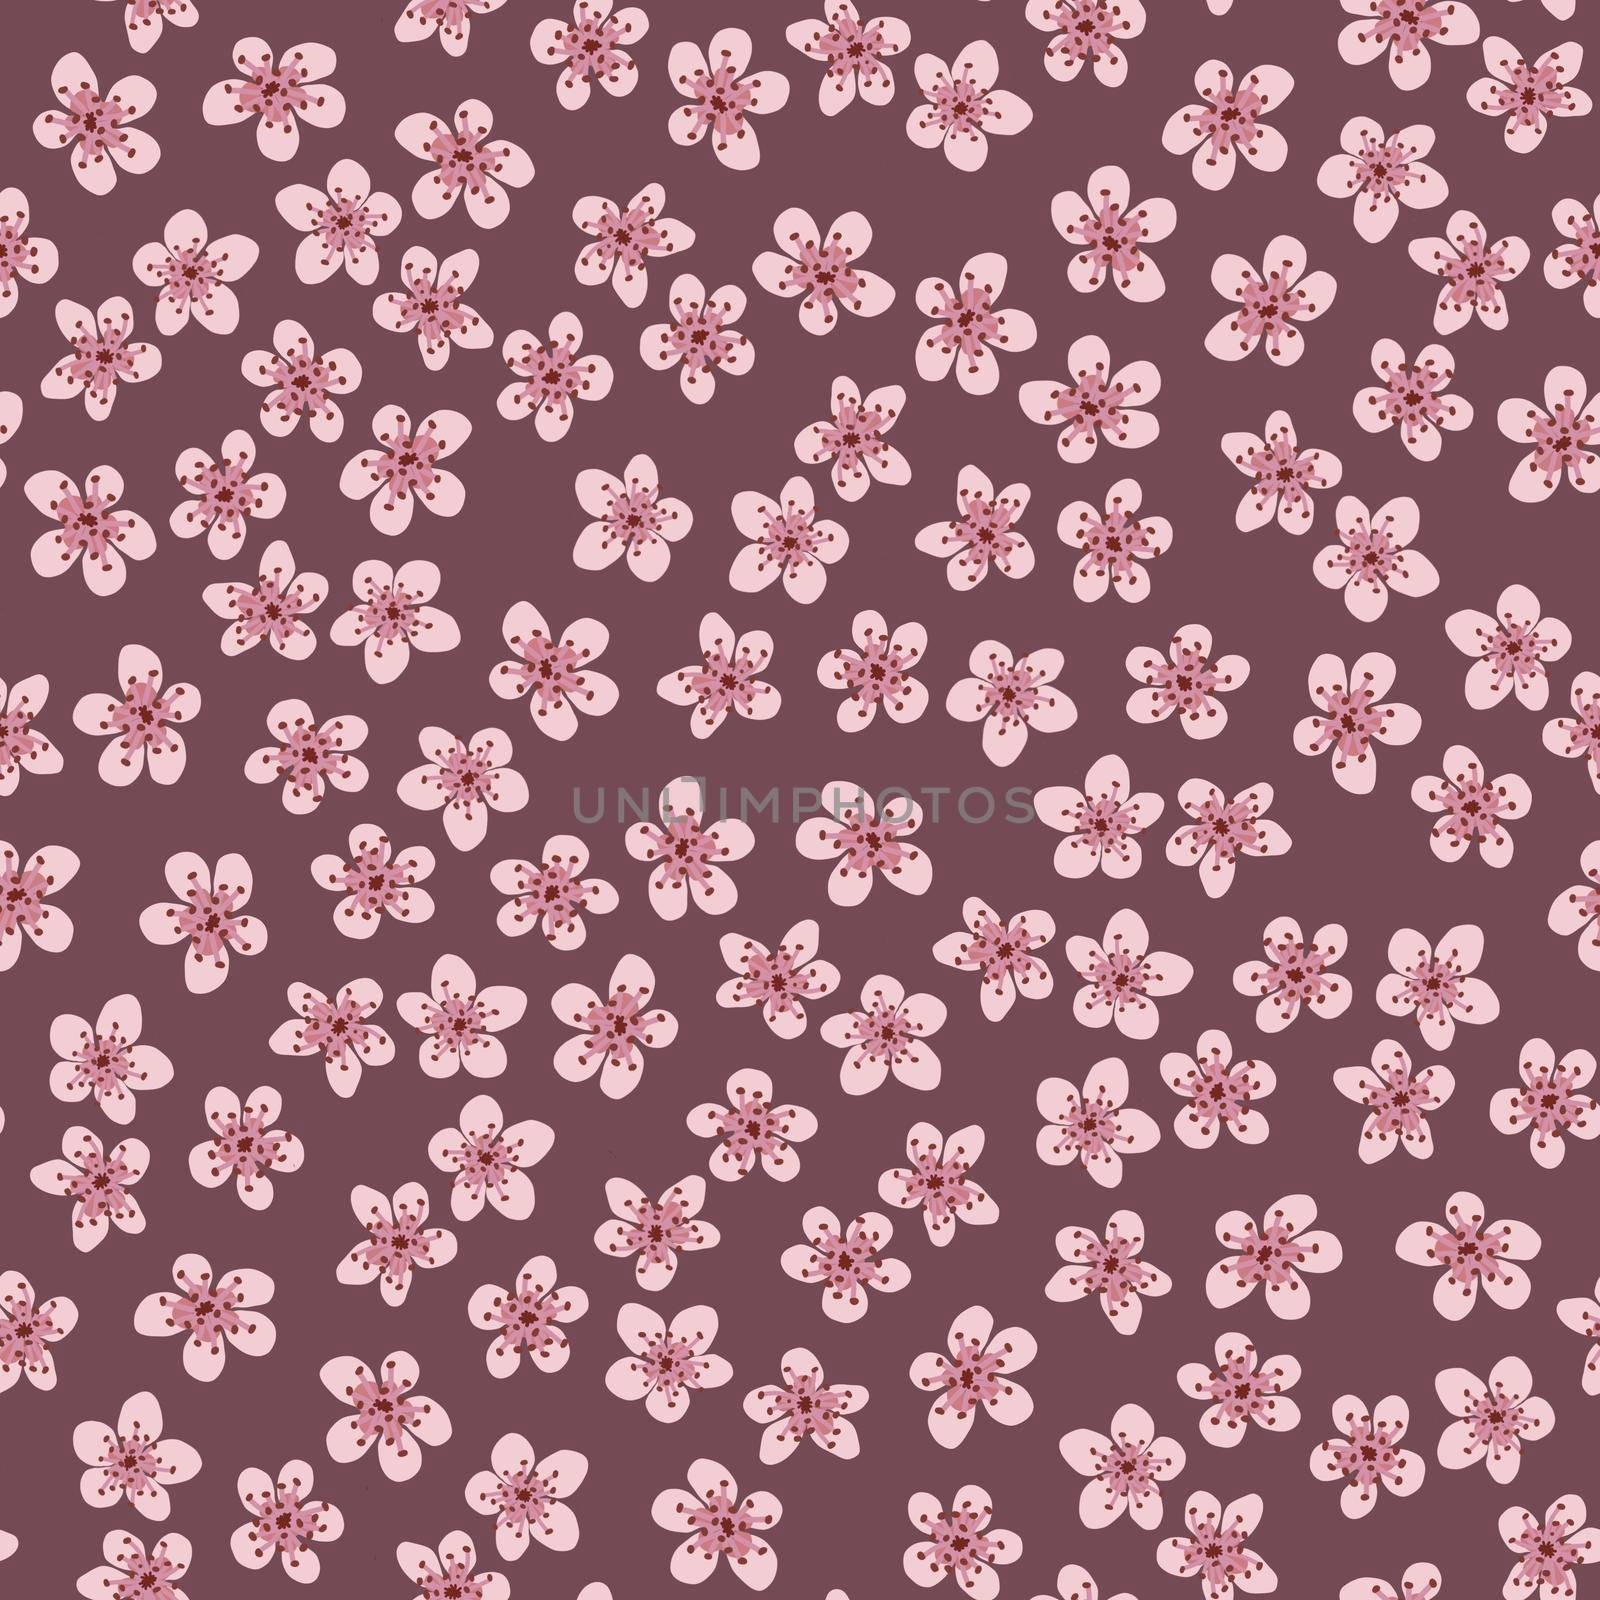 Seamless pattern with blossoming Japanese cherry sakura for fabric, packaging, wallpaper, textile decor, design, invitations, print, gift wrap, manufacturing. Pink flowers on rosybrown background. by Angelsmoon